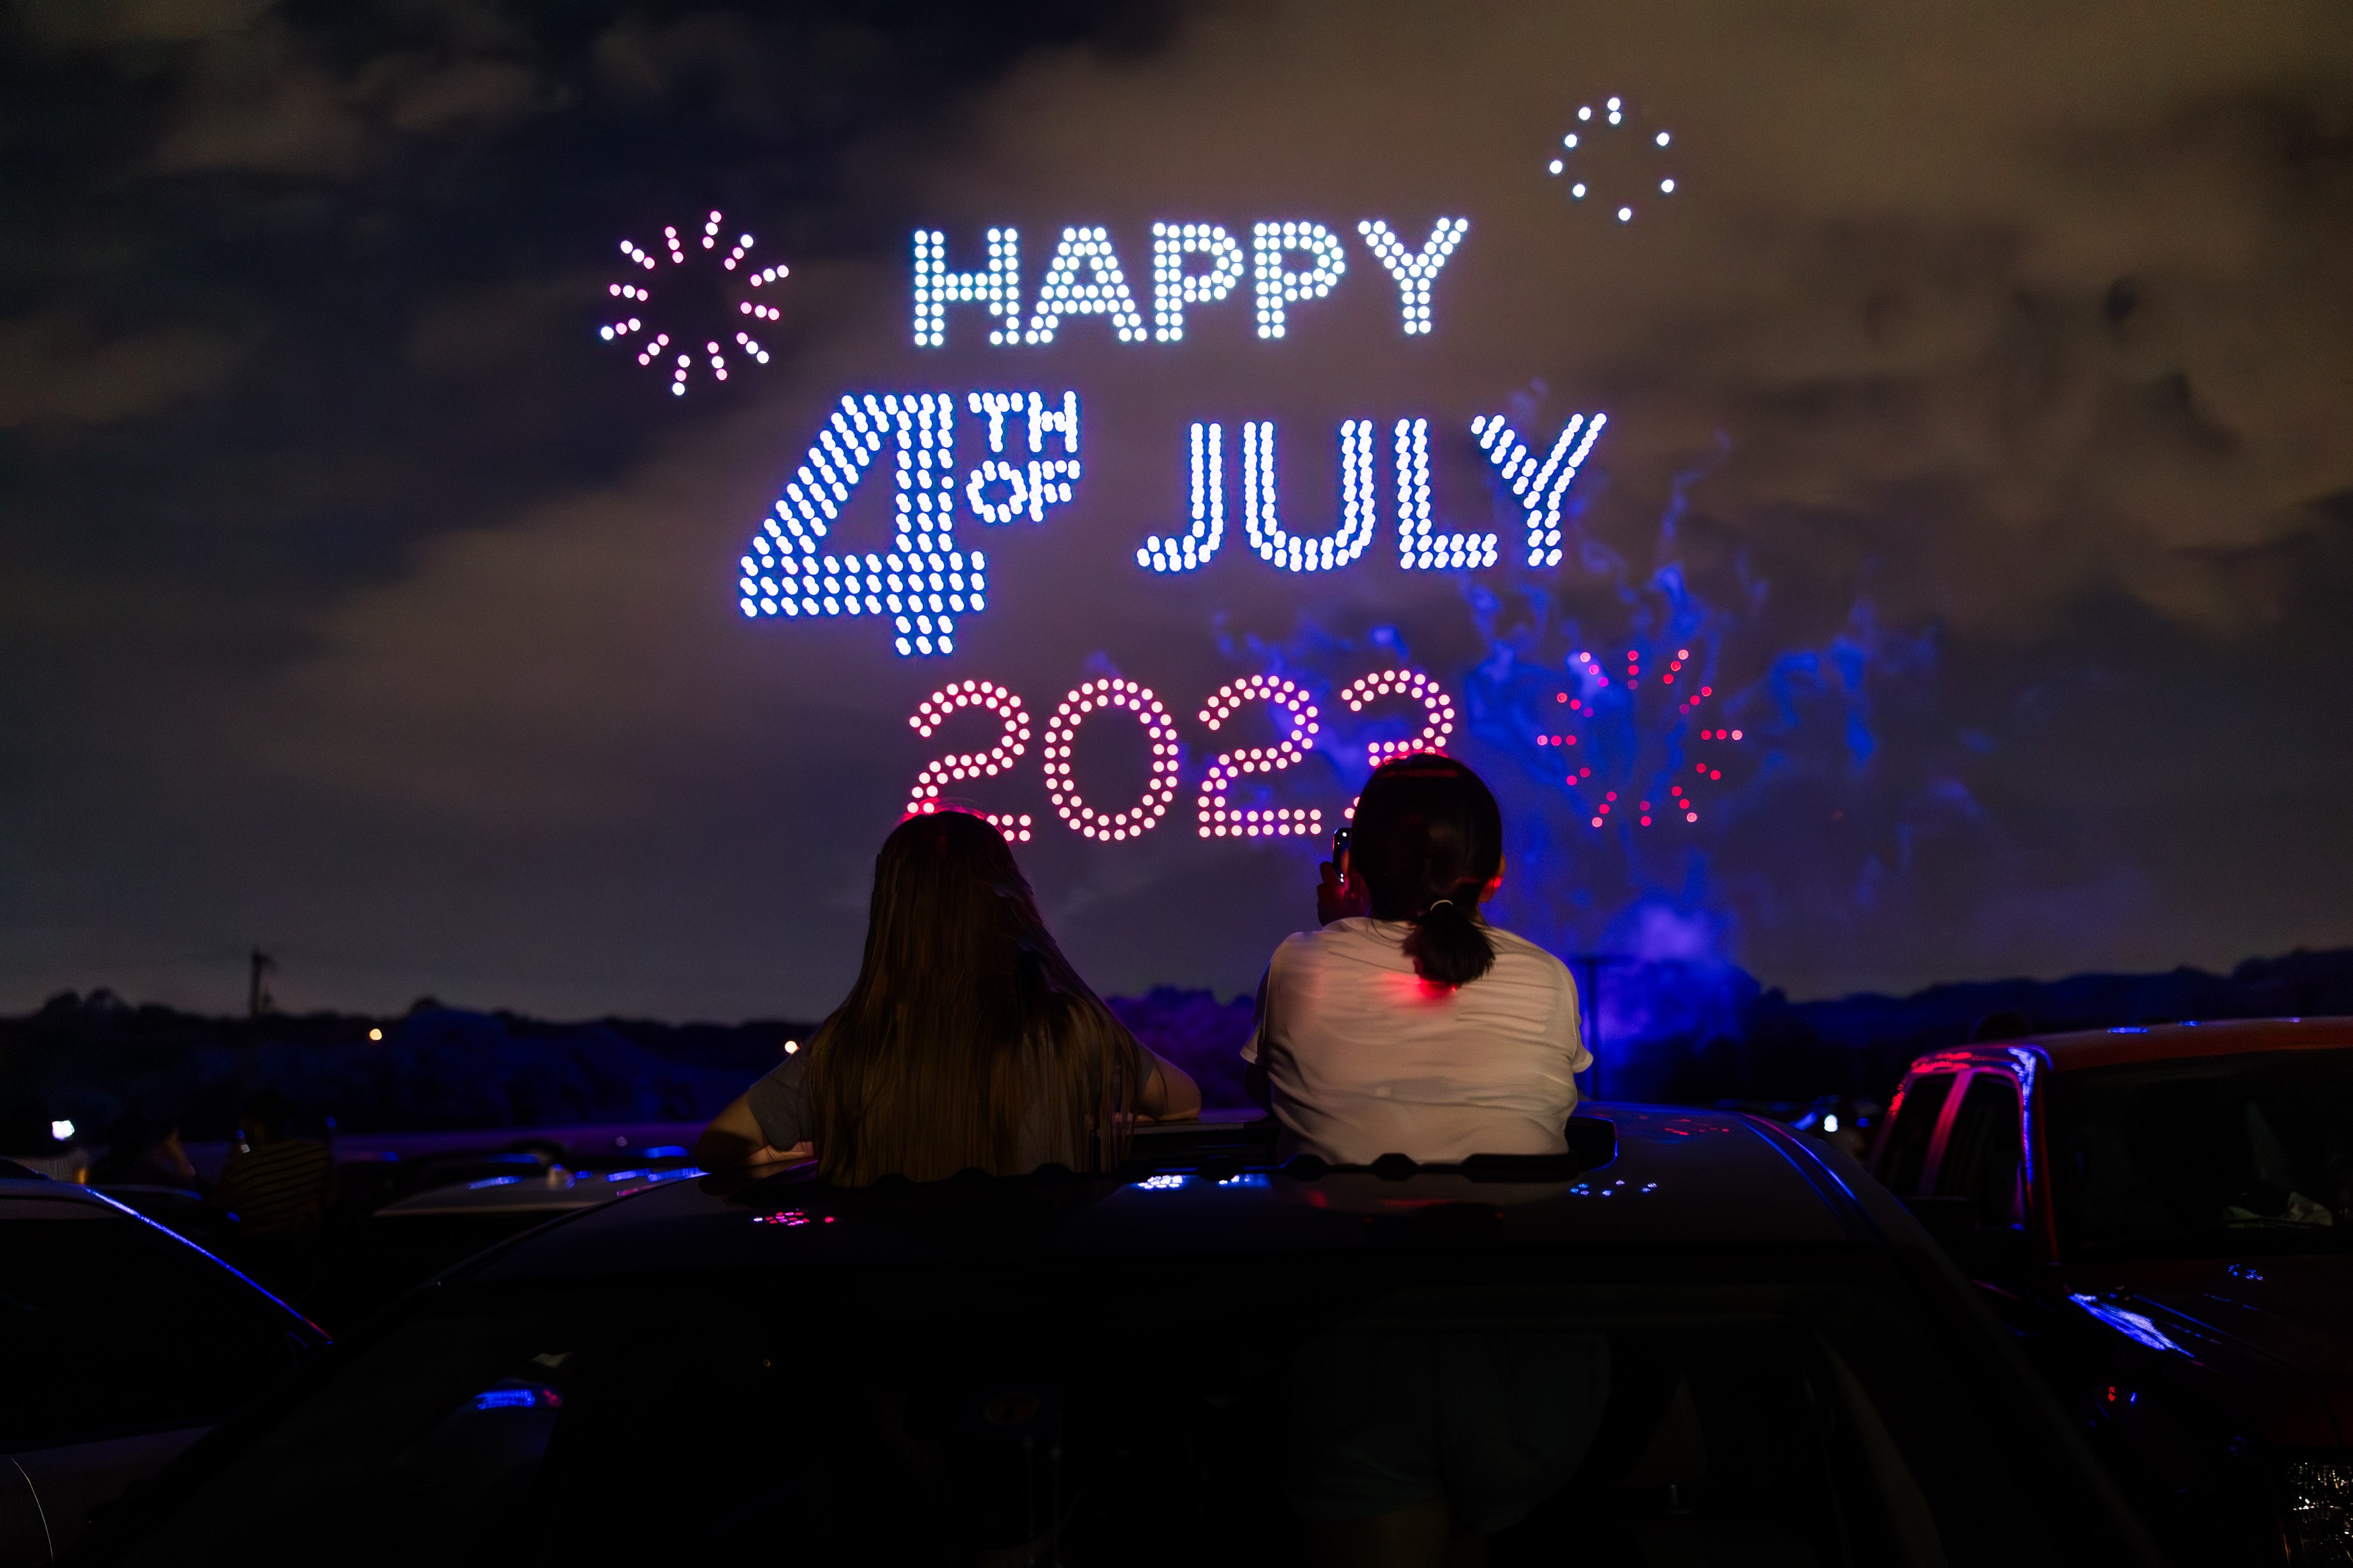 Drone show displays light up the sky on Fourth of July - BBC News